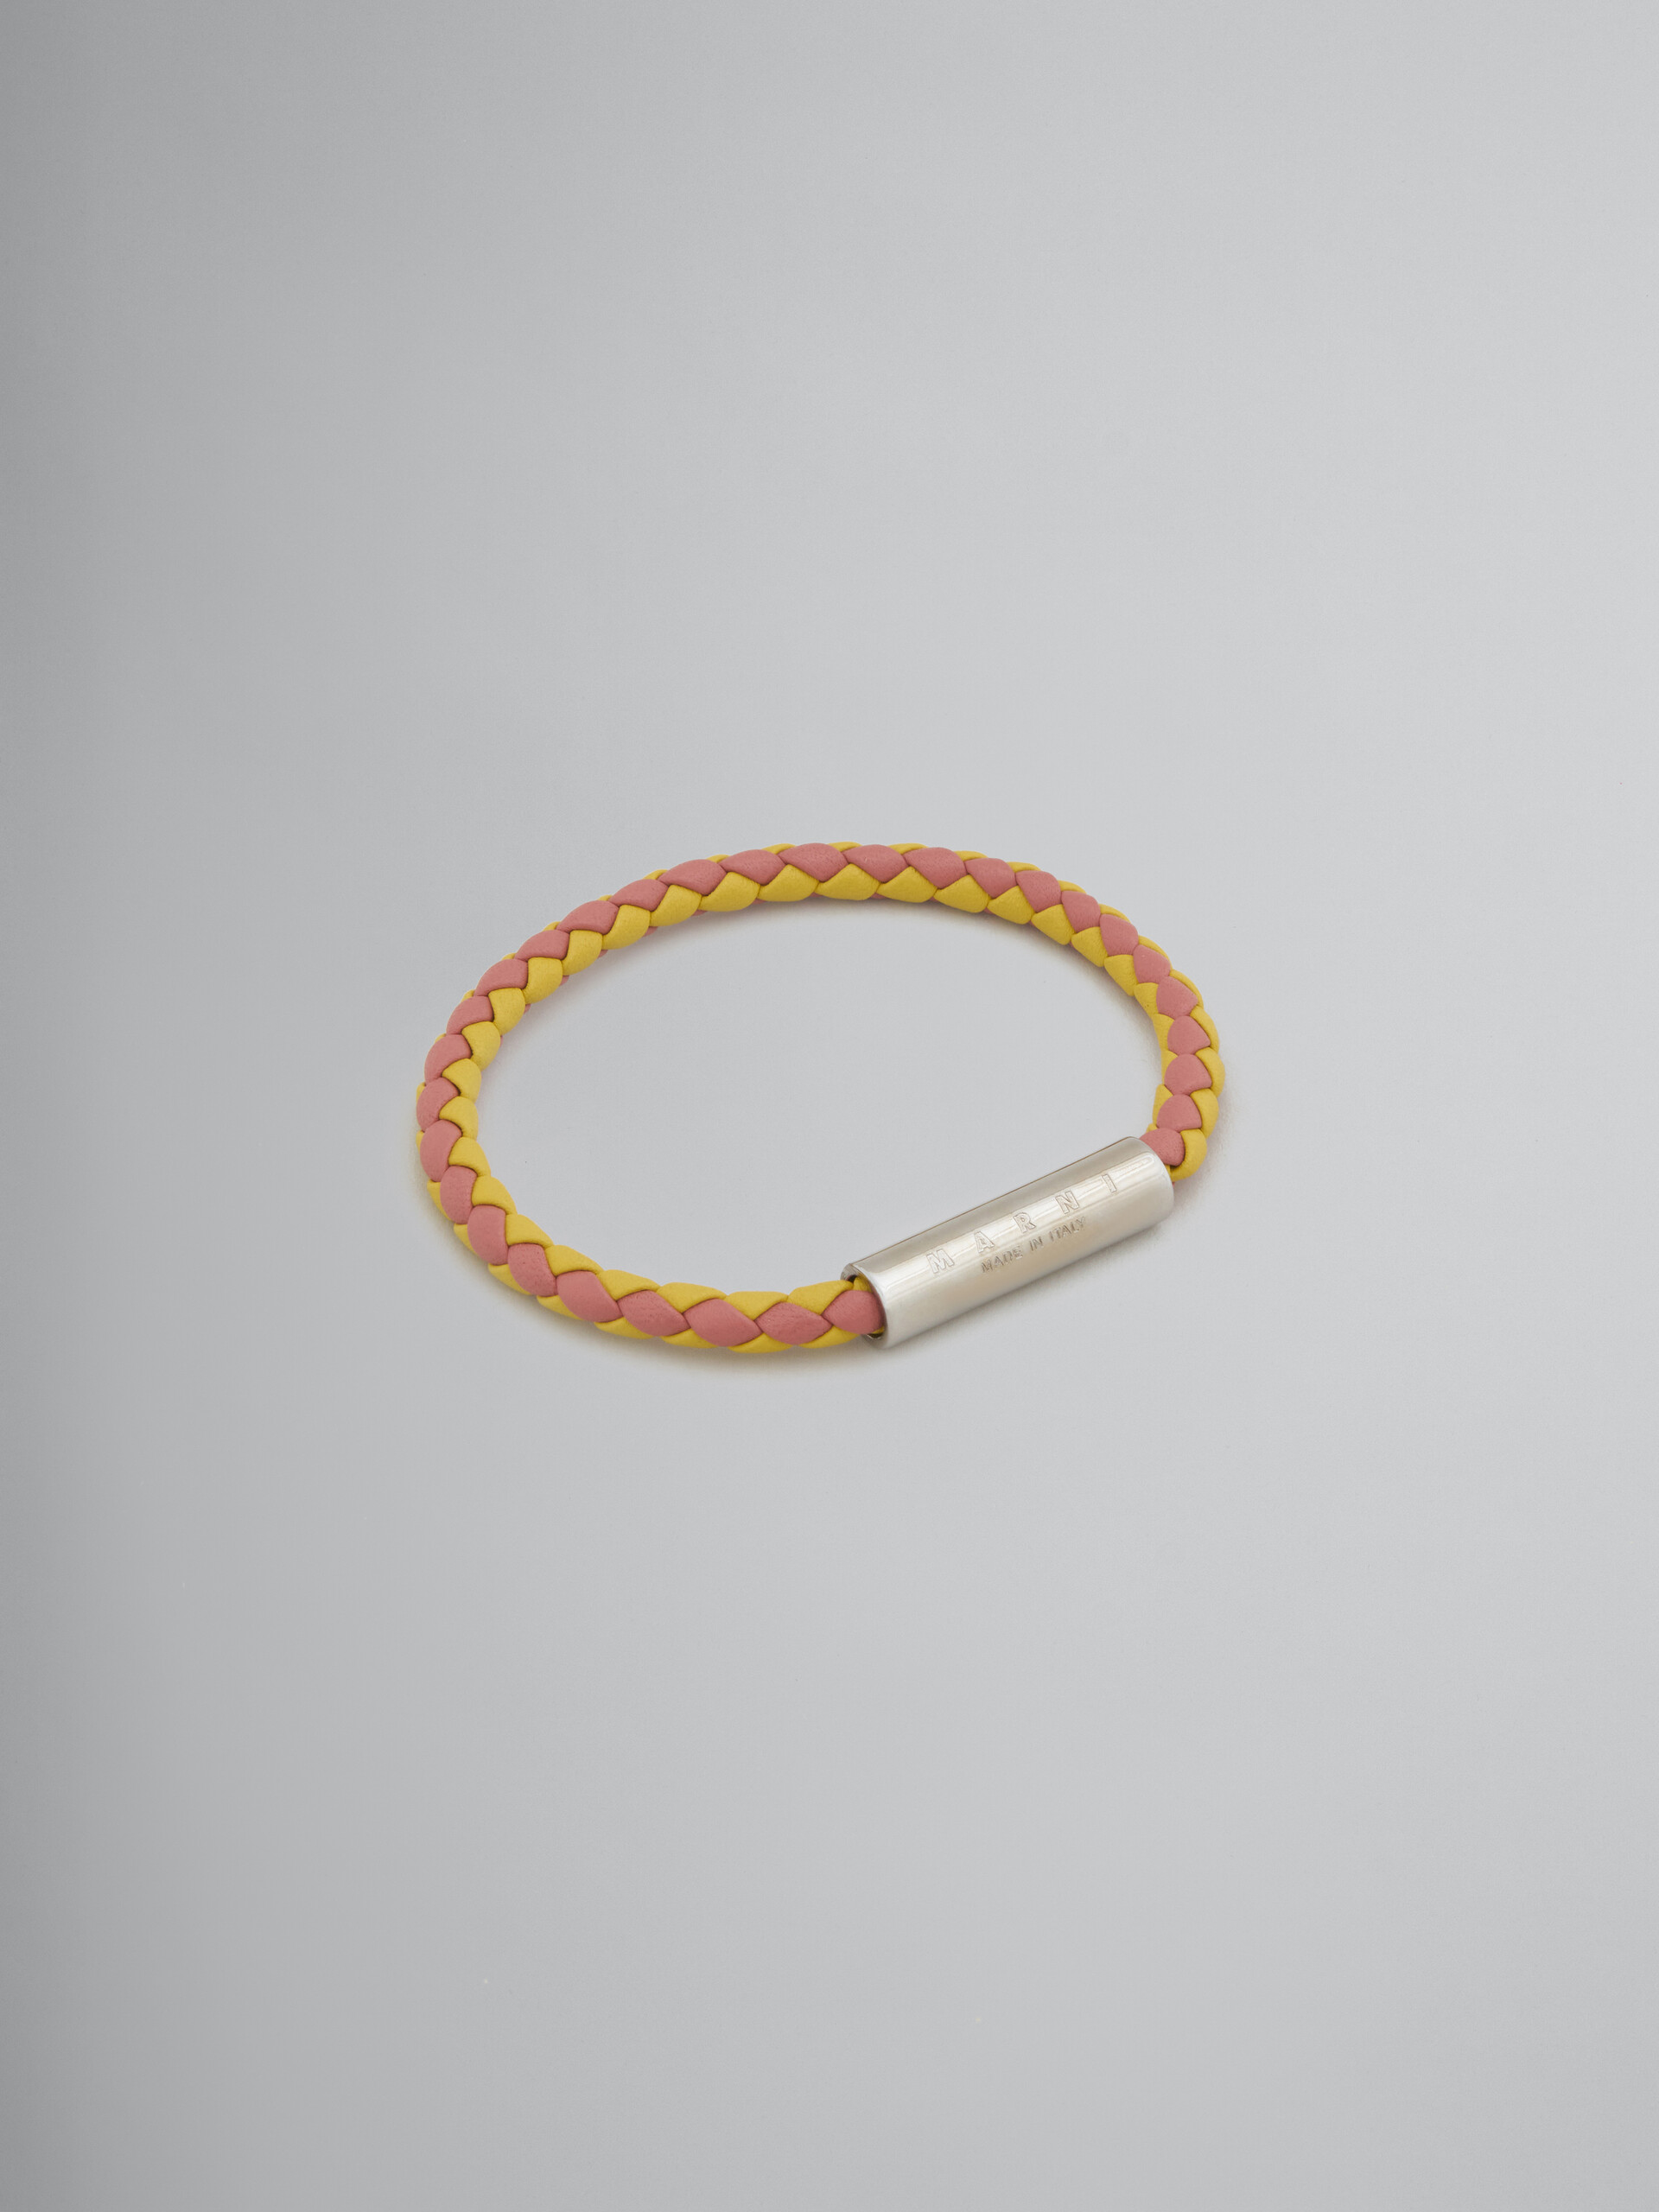 Yellow and pink woven leather bracelet - Bracelets - Image 1